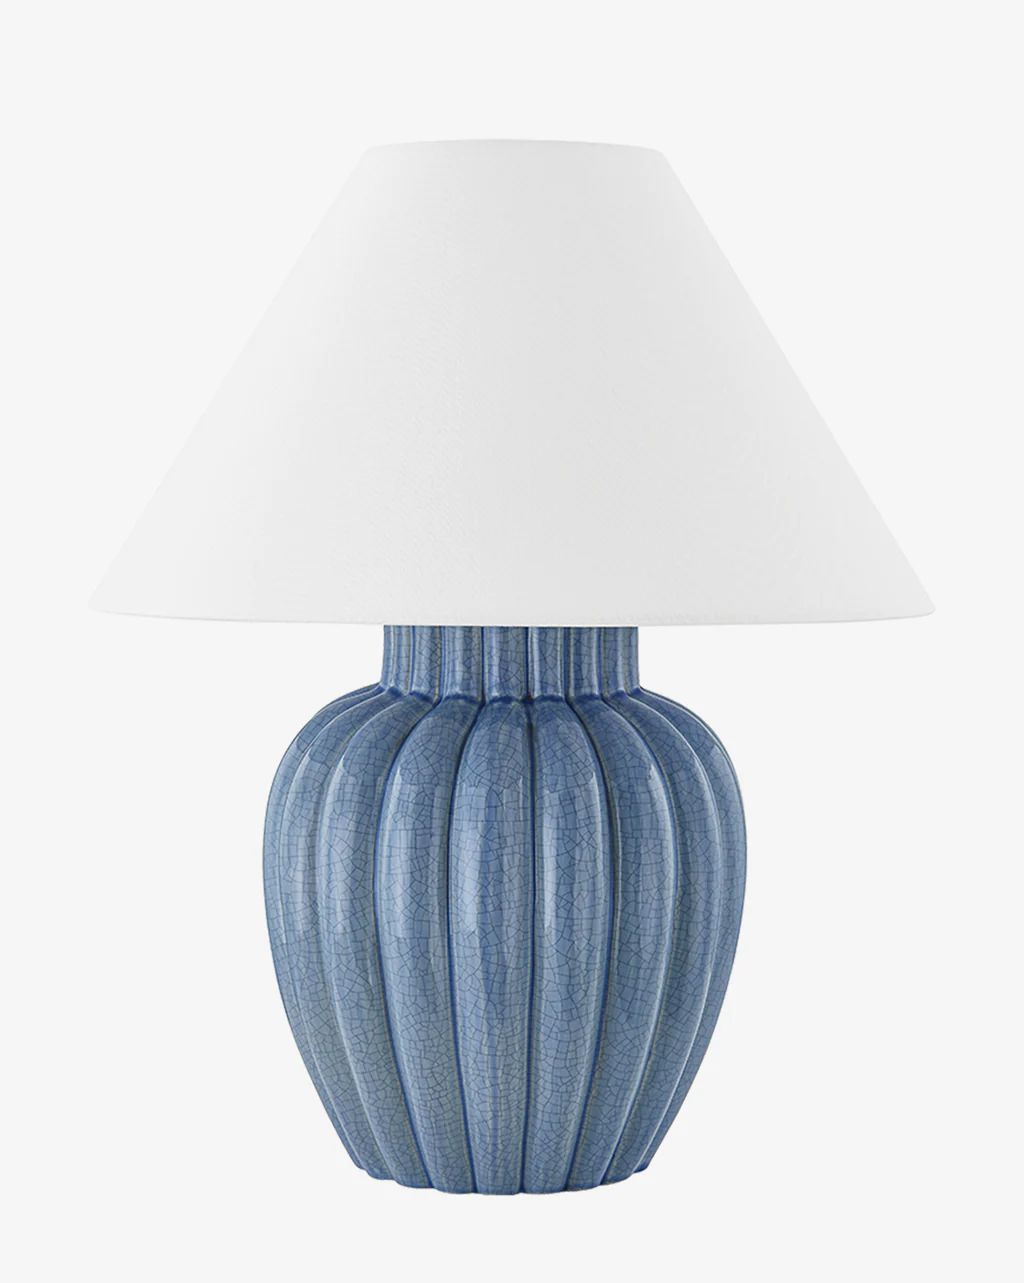 Clarendon Table Lamp | McGee & Co.